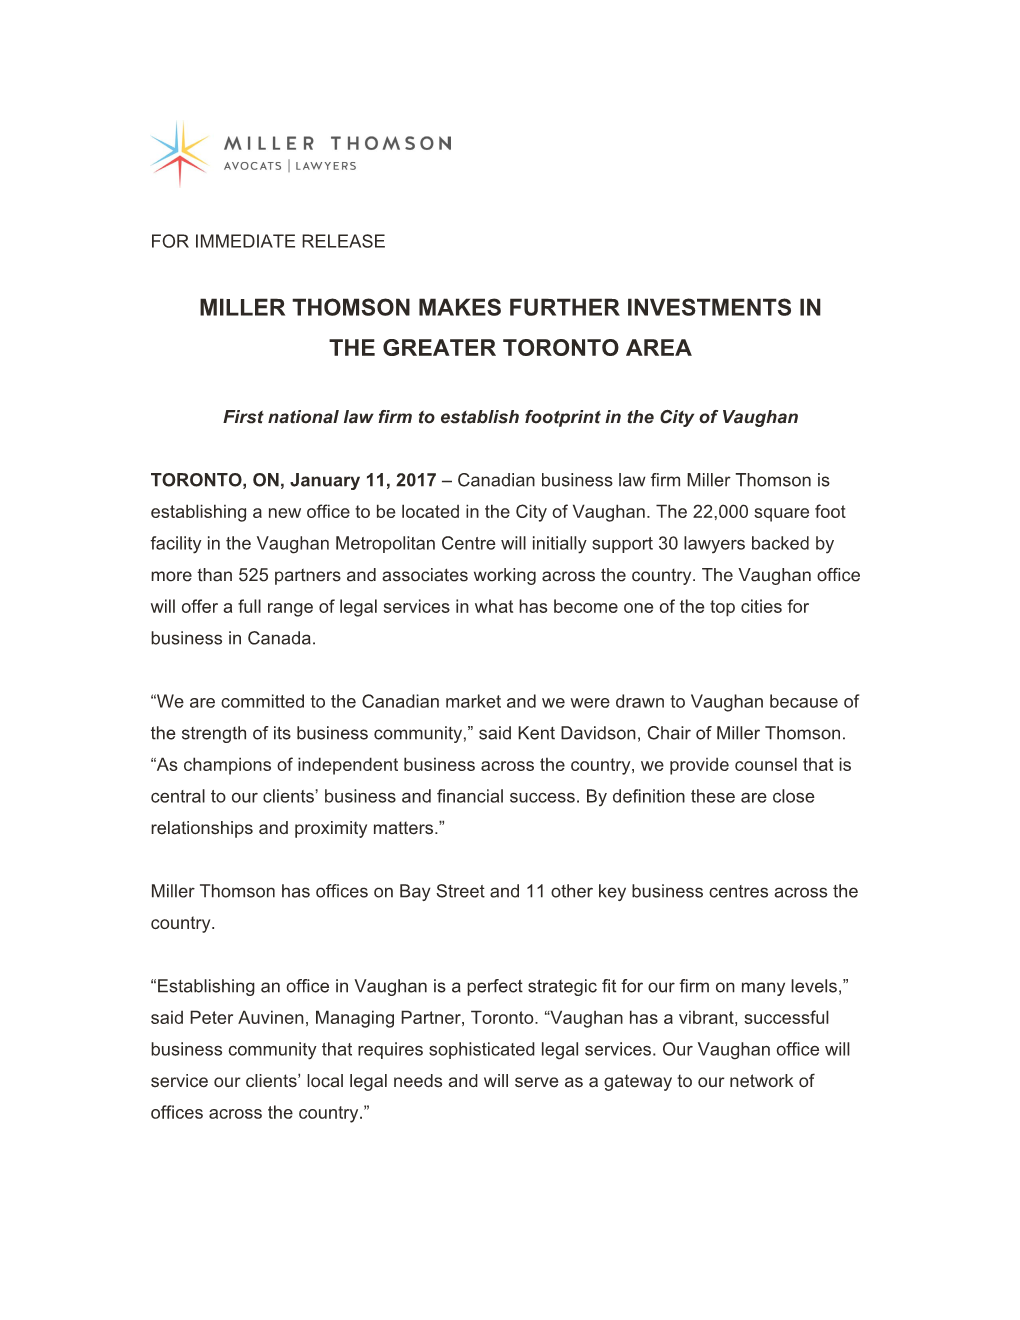 Miller Thomson Makes Further Investments in the Greater Toronto Area